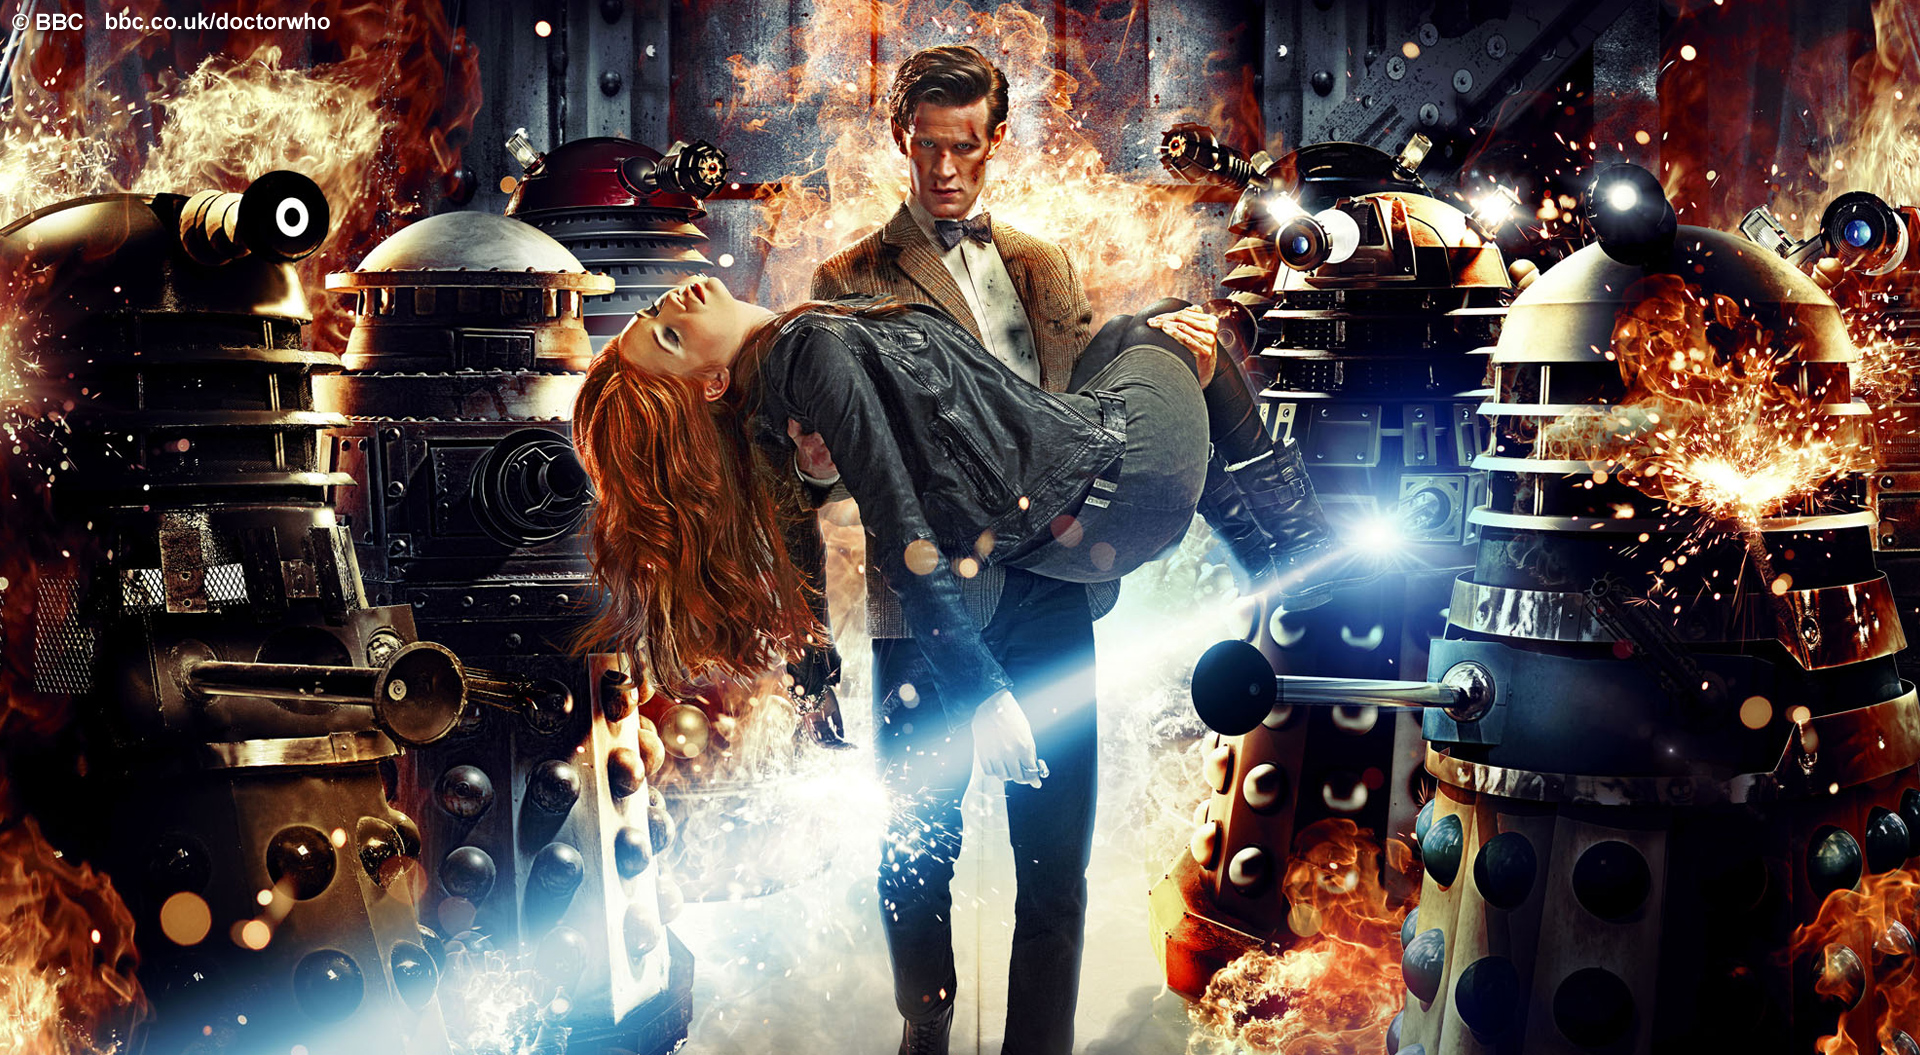 Cool New Doctor Who Wallpaper From The Bbc Ace Ics Uk And